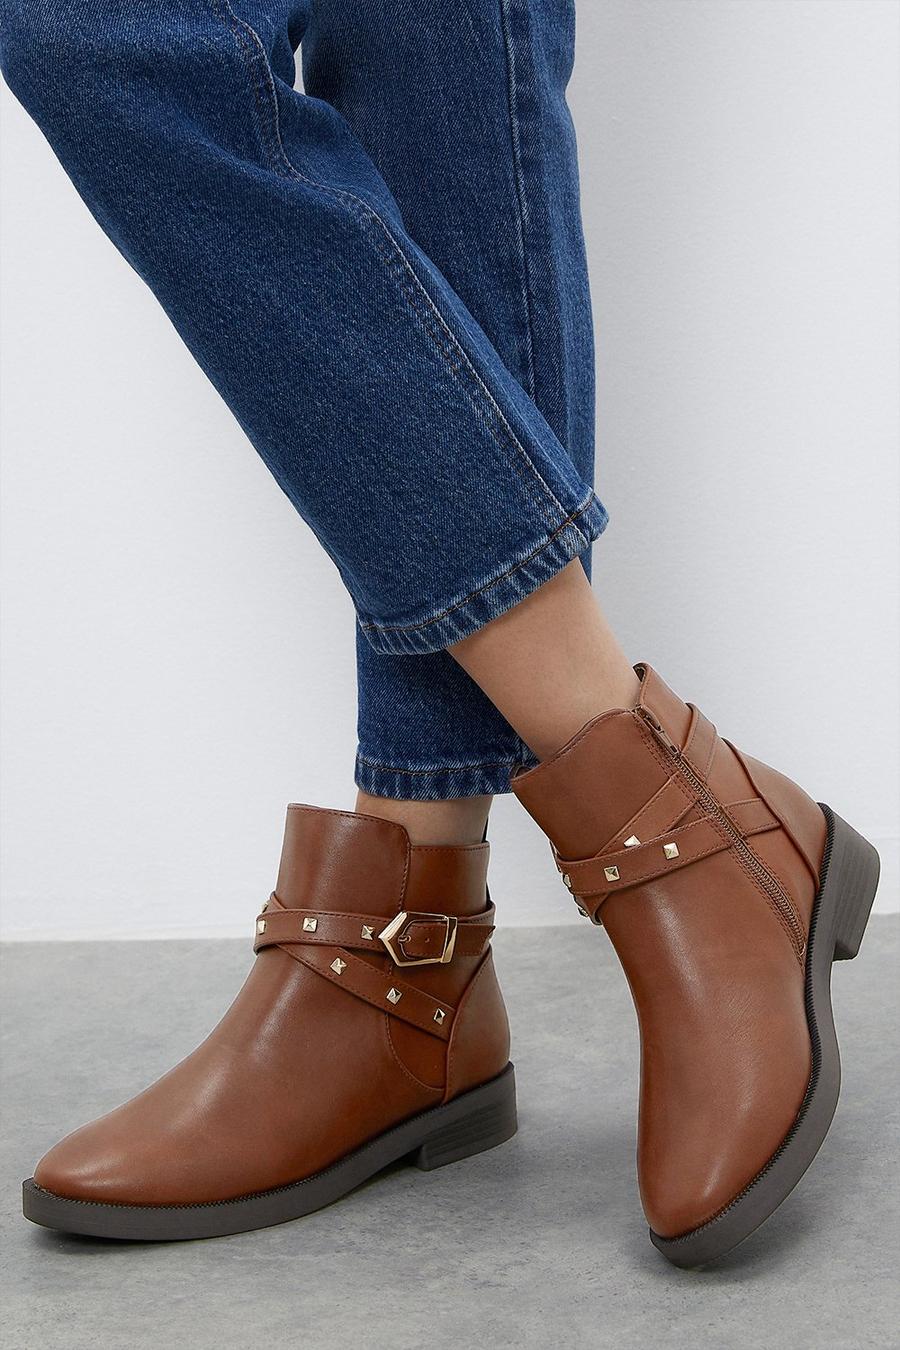 Good For The Sole: Maisie Comfort Wrap Strap Ankle Boots